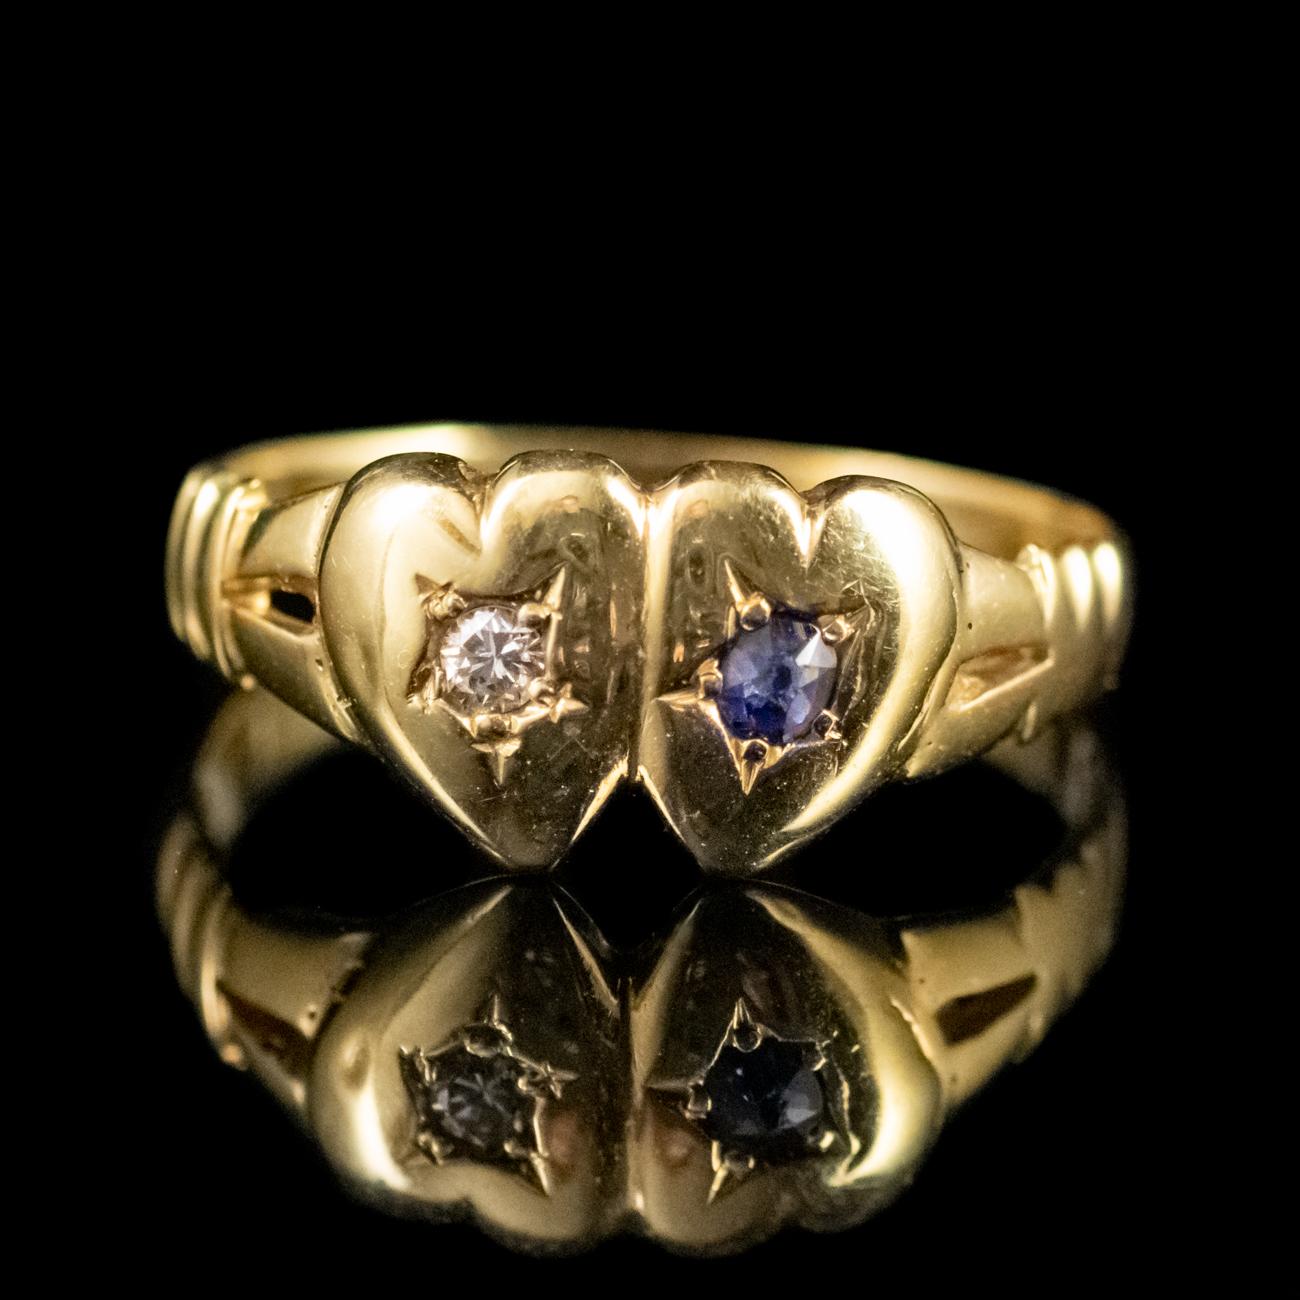 This lovely Antique Victorian ring has been commissioned in 18ct Yellow Gold. It features the shape of two hearts, one set with a sparkling old cut Diamond weighing 0.08ct and the other set with a beautiful old cut deep blue Sapphire also weighing